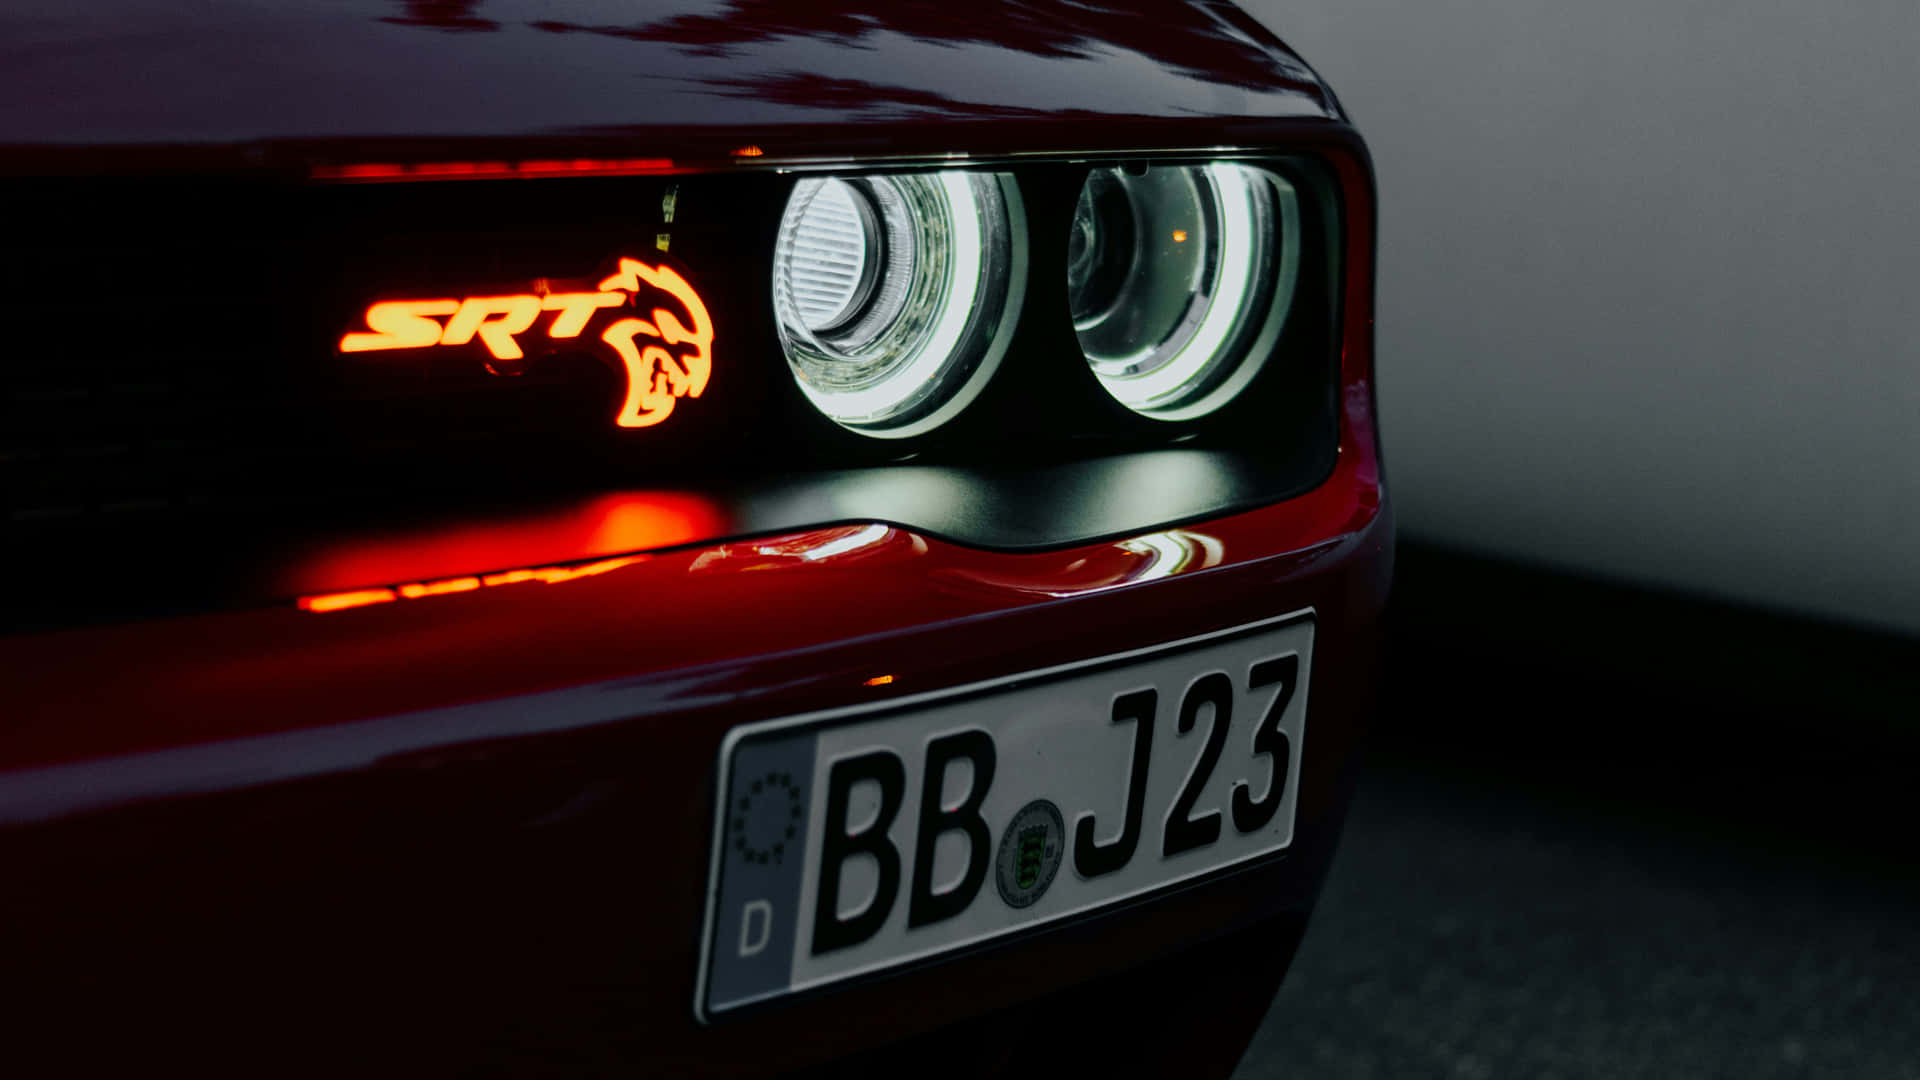 Red S R T Vehicle Rear Lights Wallpaper